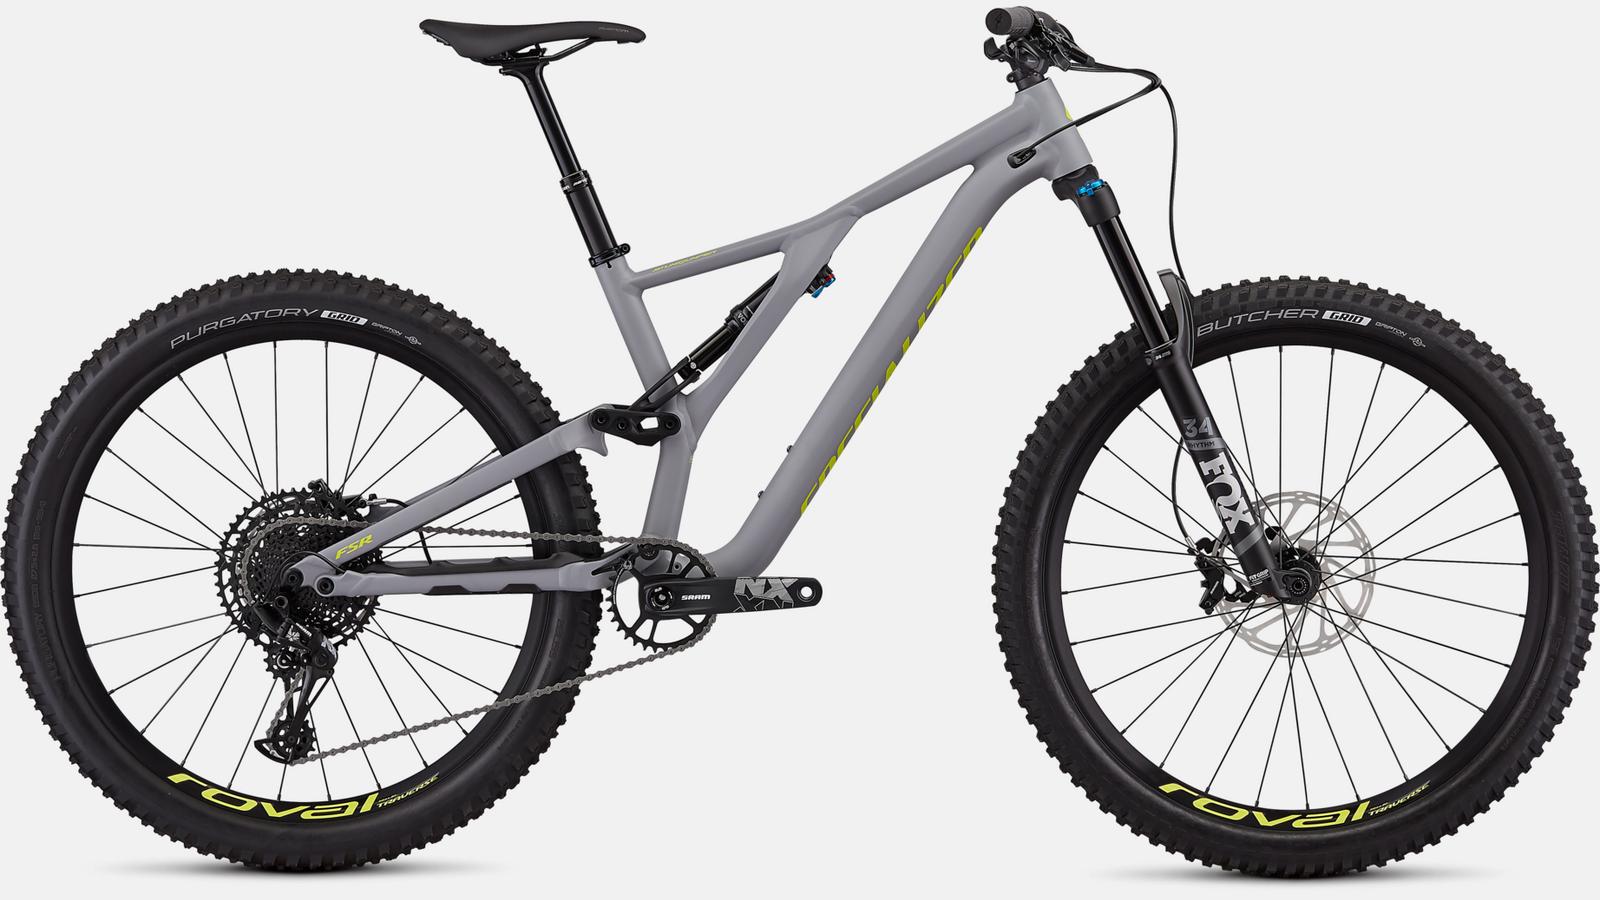 Paint for 2020 Specialized Stumpjumper Comp Alloy 27.5 - Satin Cool Grey